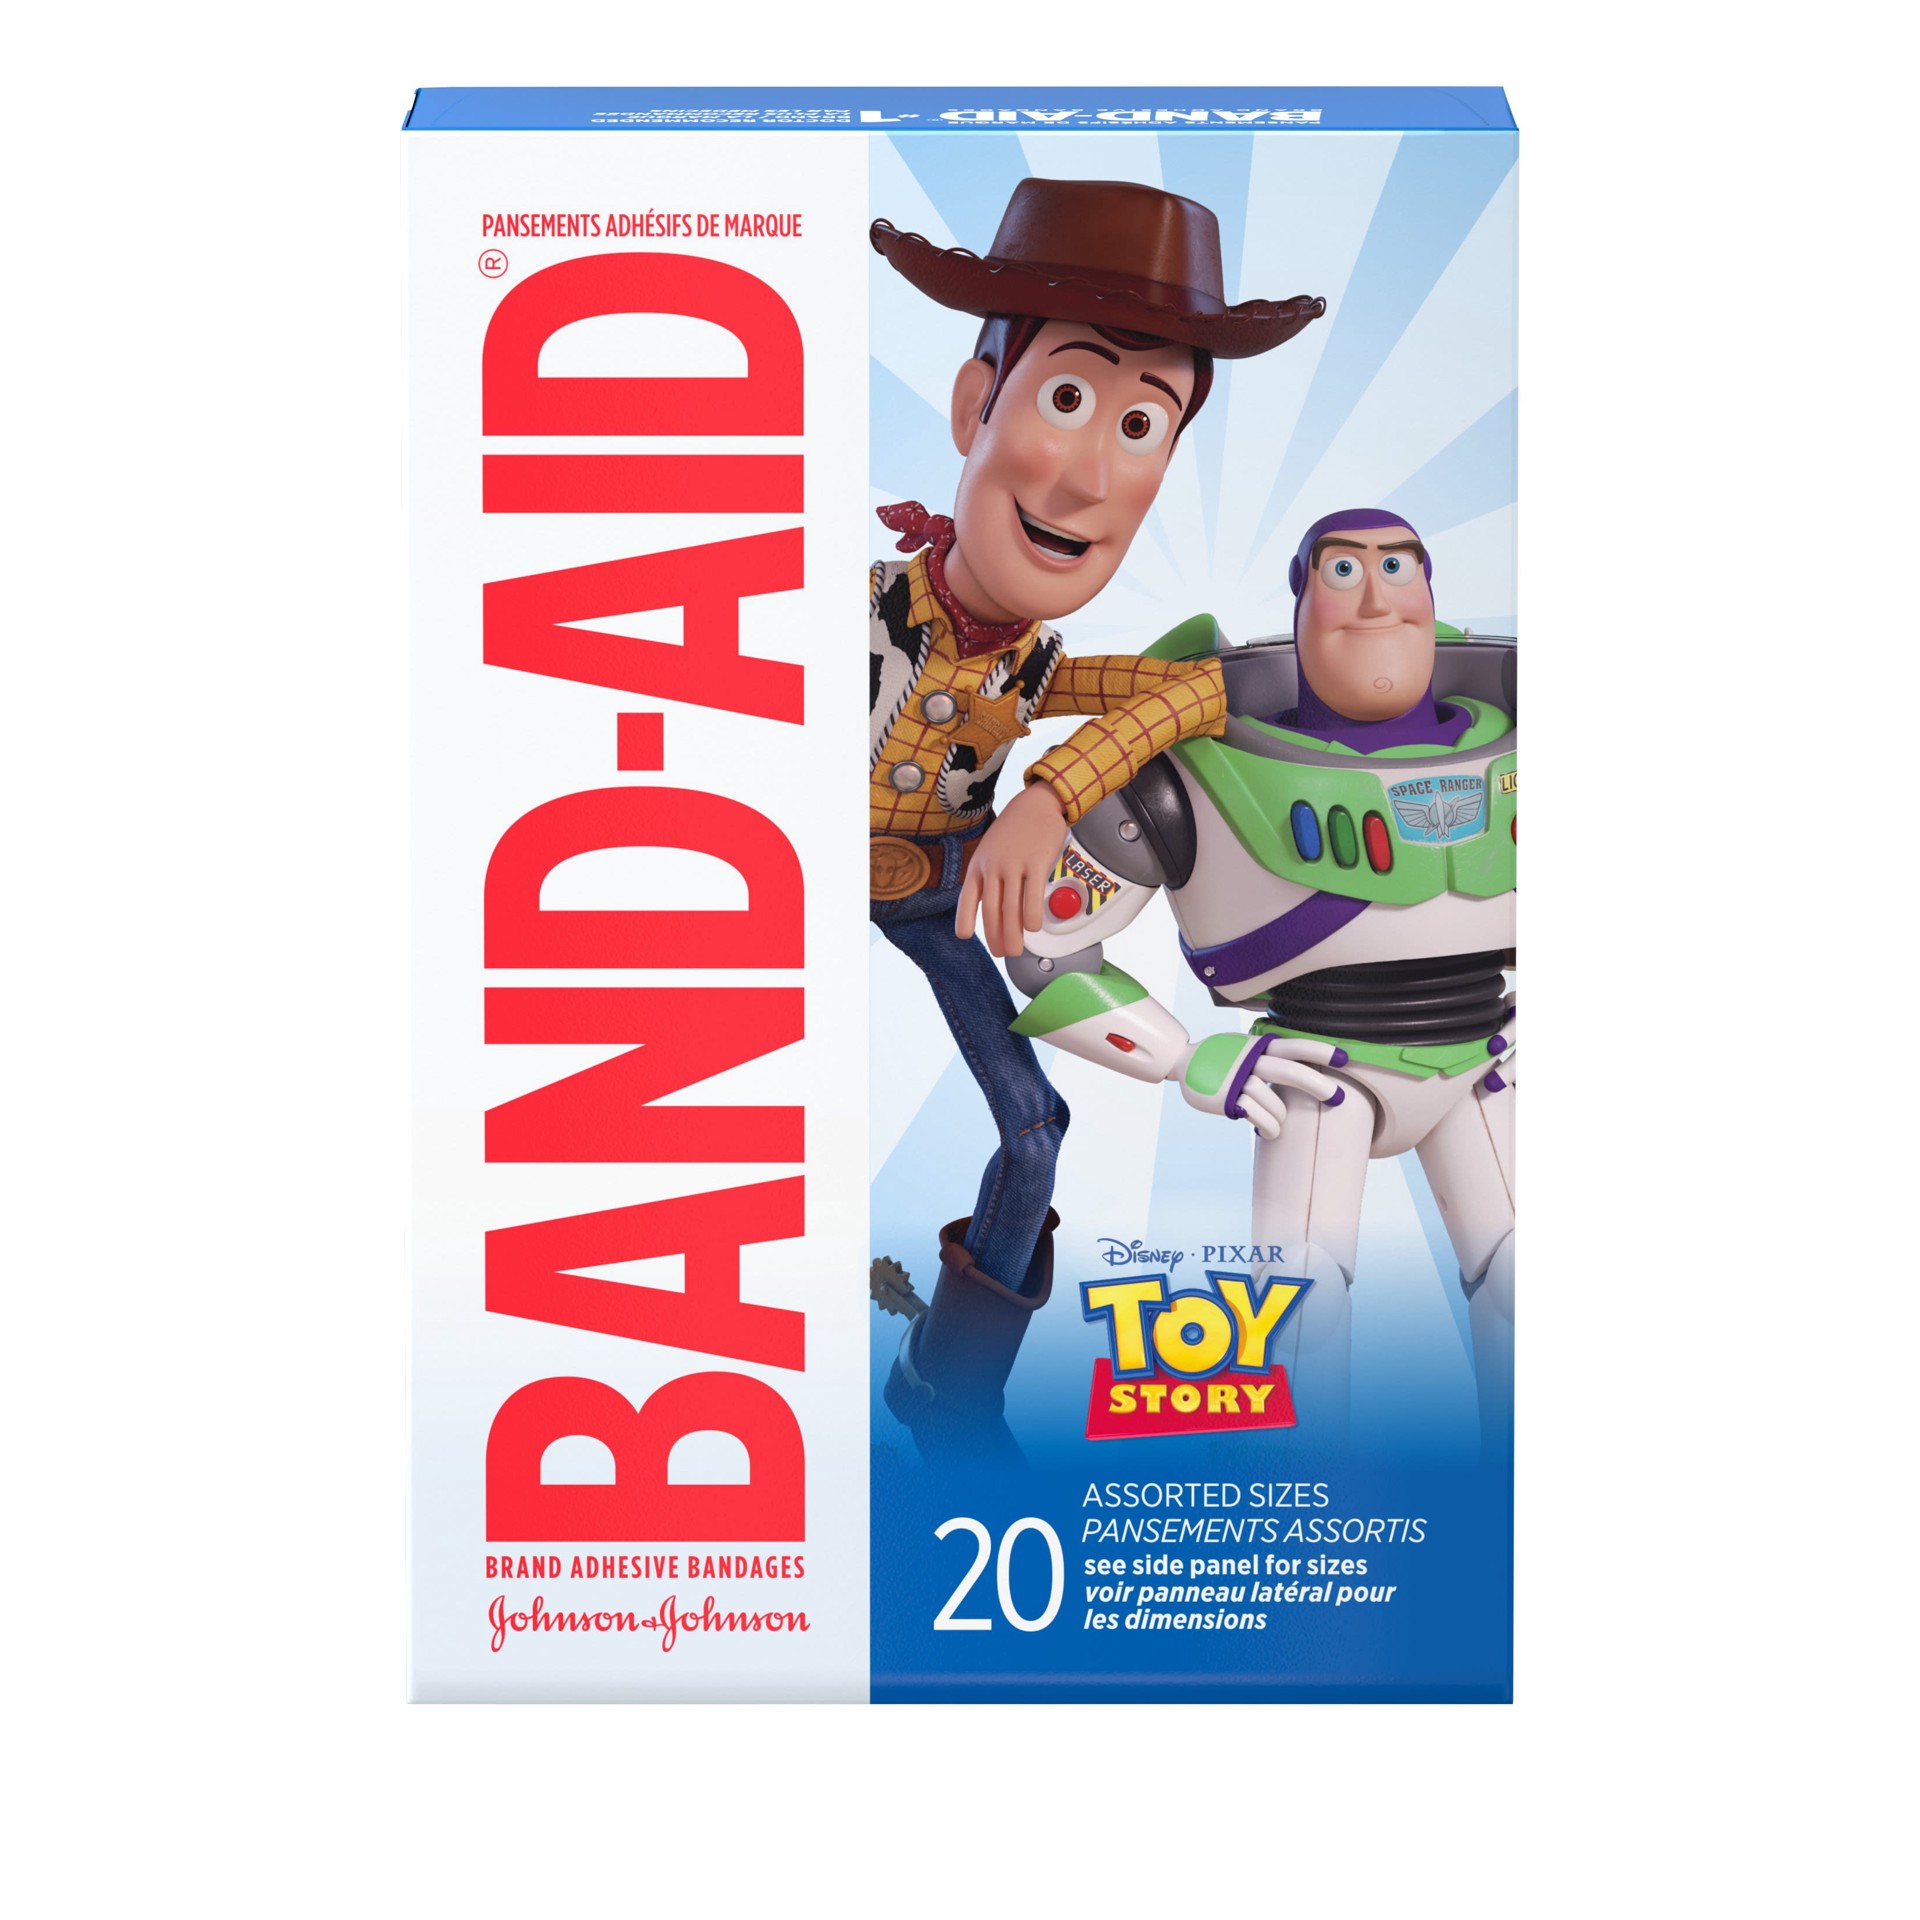 slide 8 of 9, BAND-AID Adhesive Bandages for Minor Cuts and Scrapes, Disney/Pixar Toy Story 4 for Kids, Assorted Sizes 20 ct, 20 ct